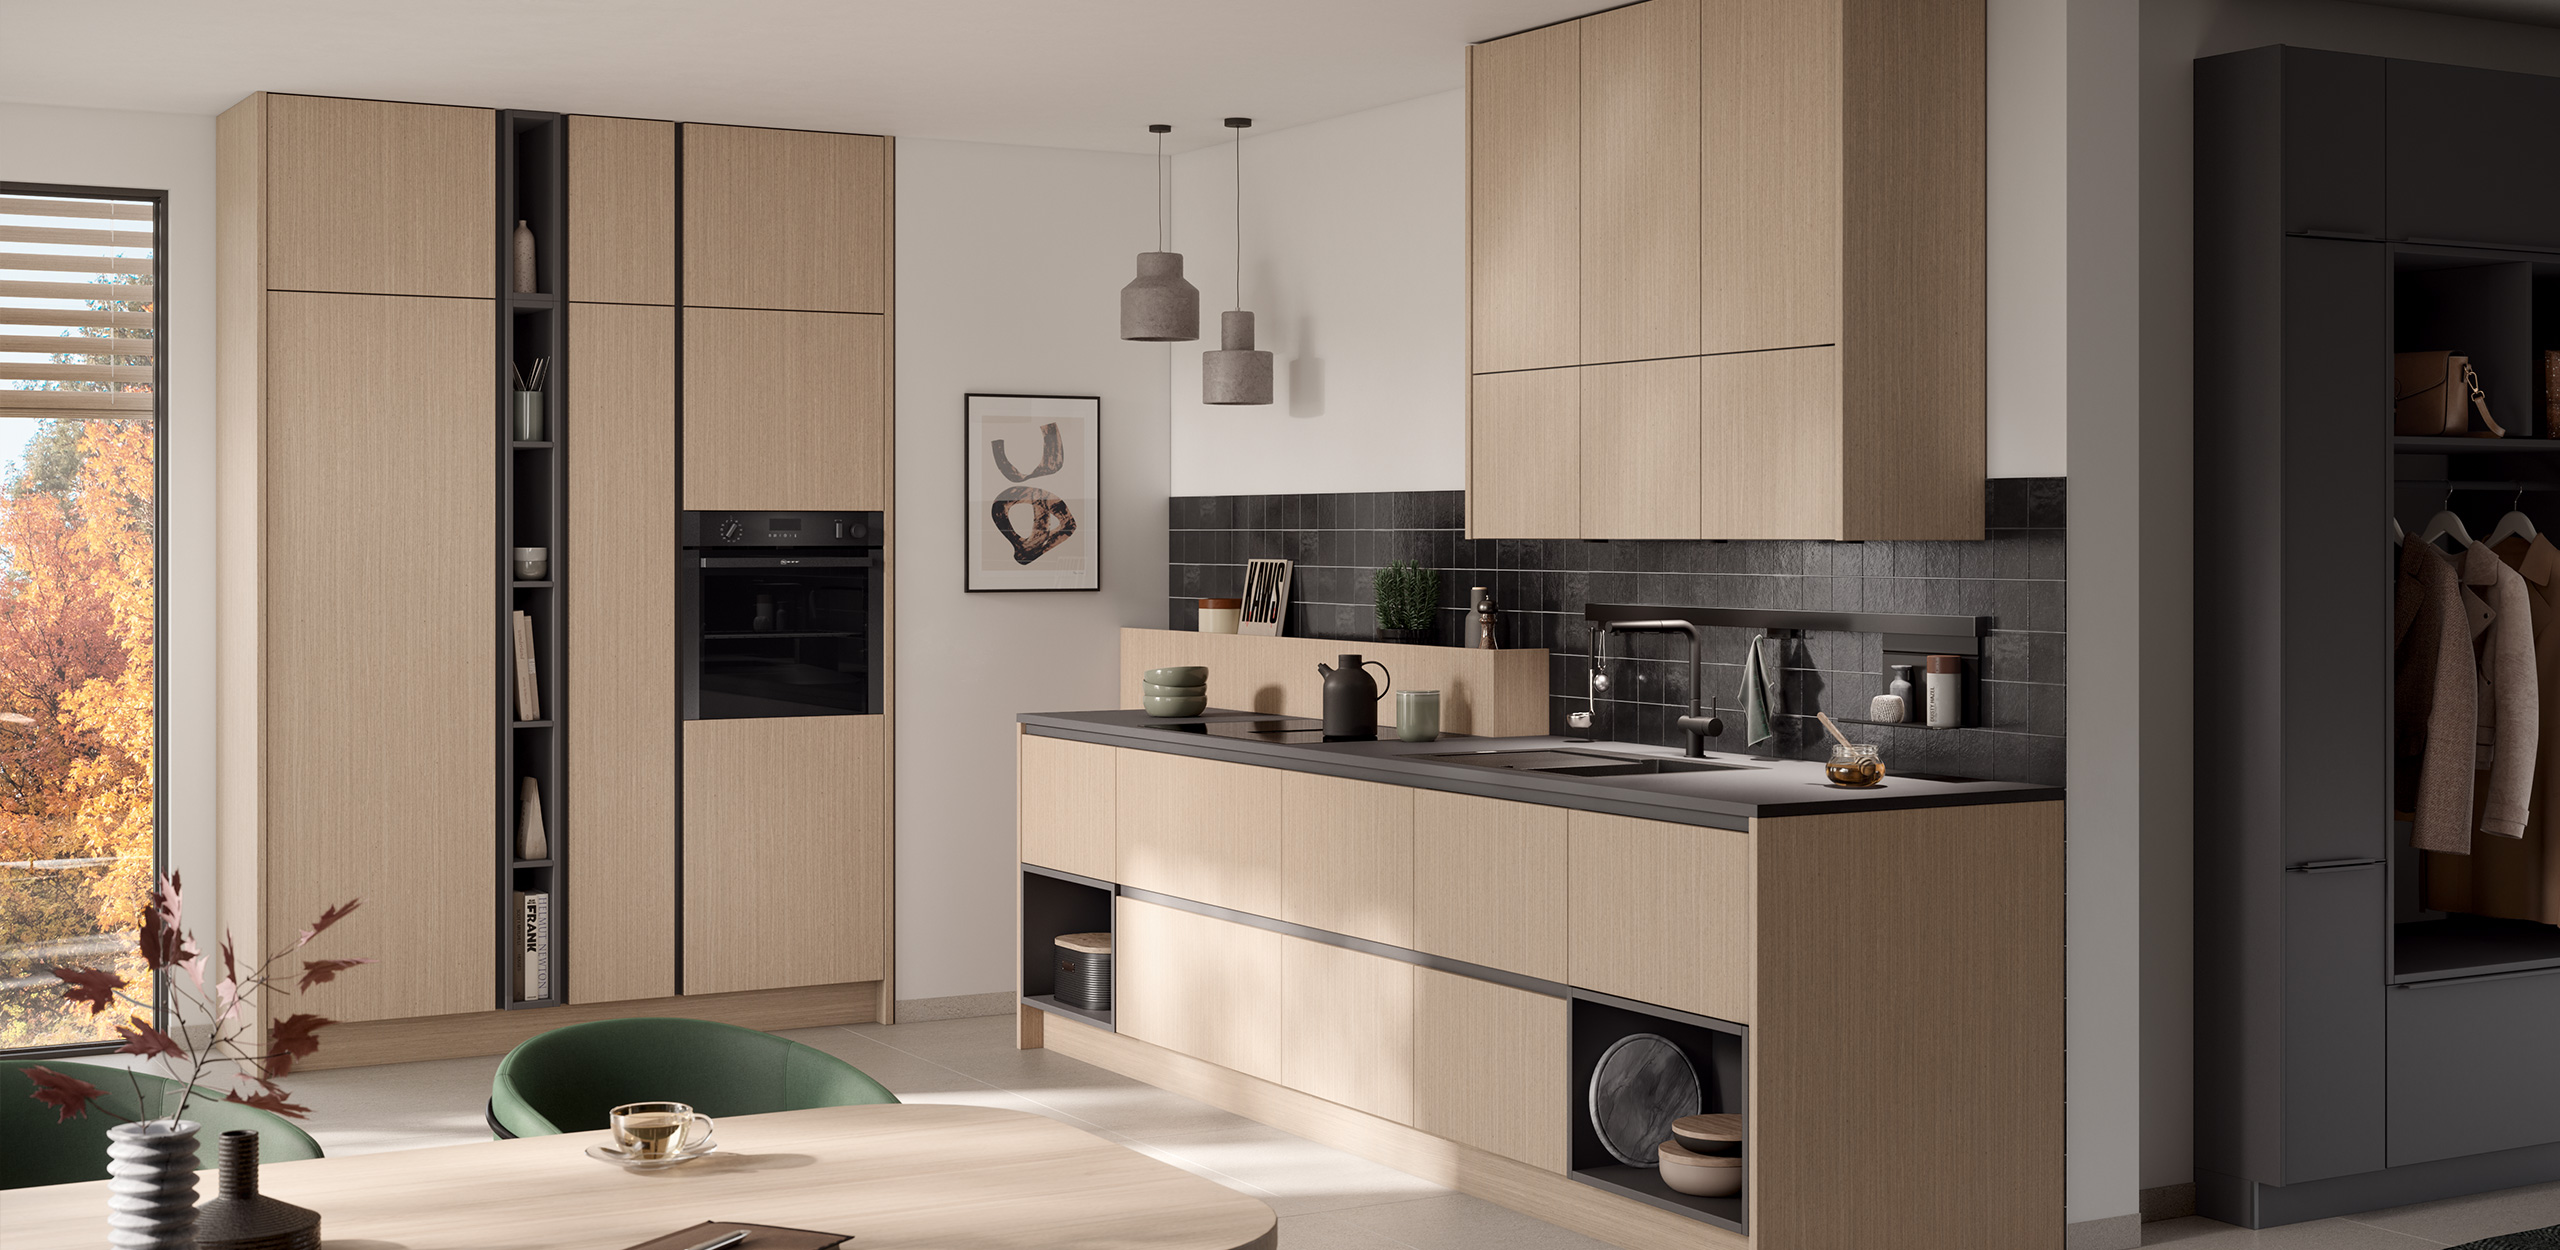 Picture of the concept130 MONTREAL-GL fine oak light with kitchen high cupboard up to the ceiling, integrated oven, kitchen unit and overhead wall cupboards, in the foreground dining table with green upholstered chairs.